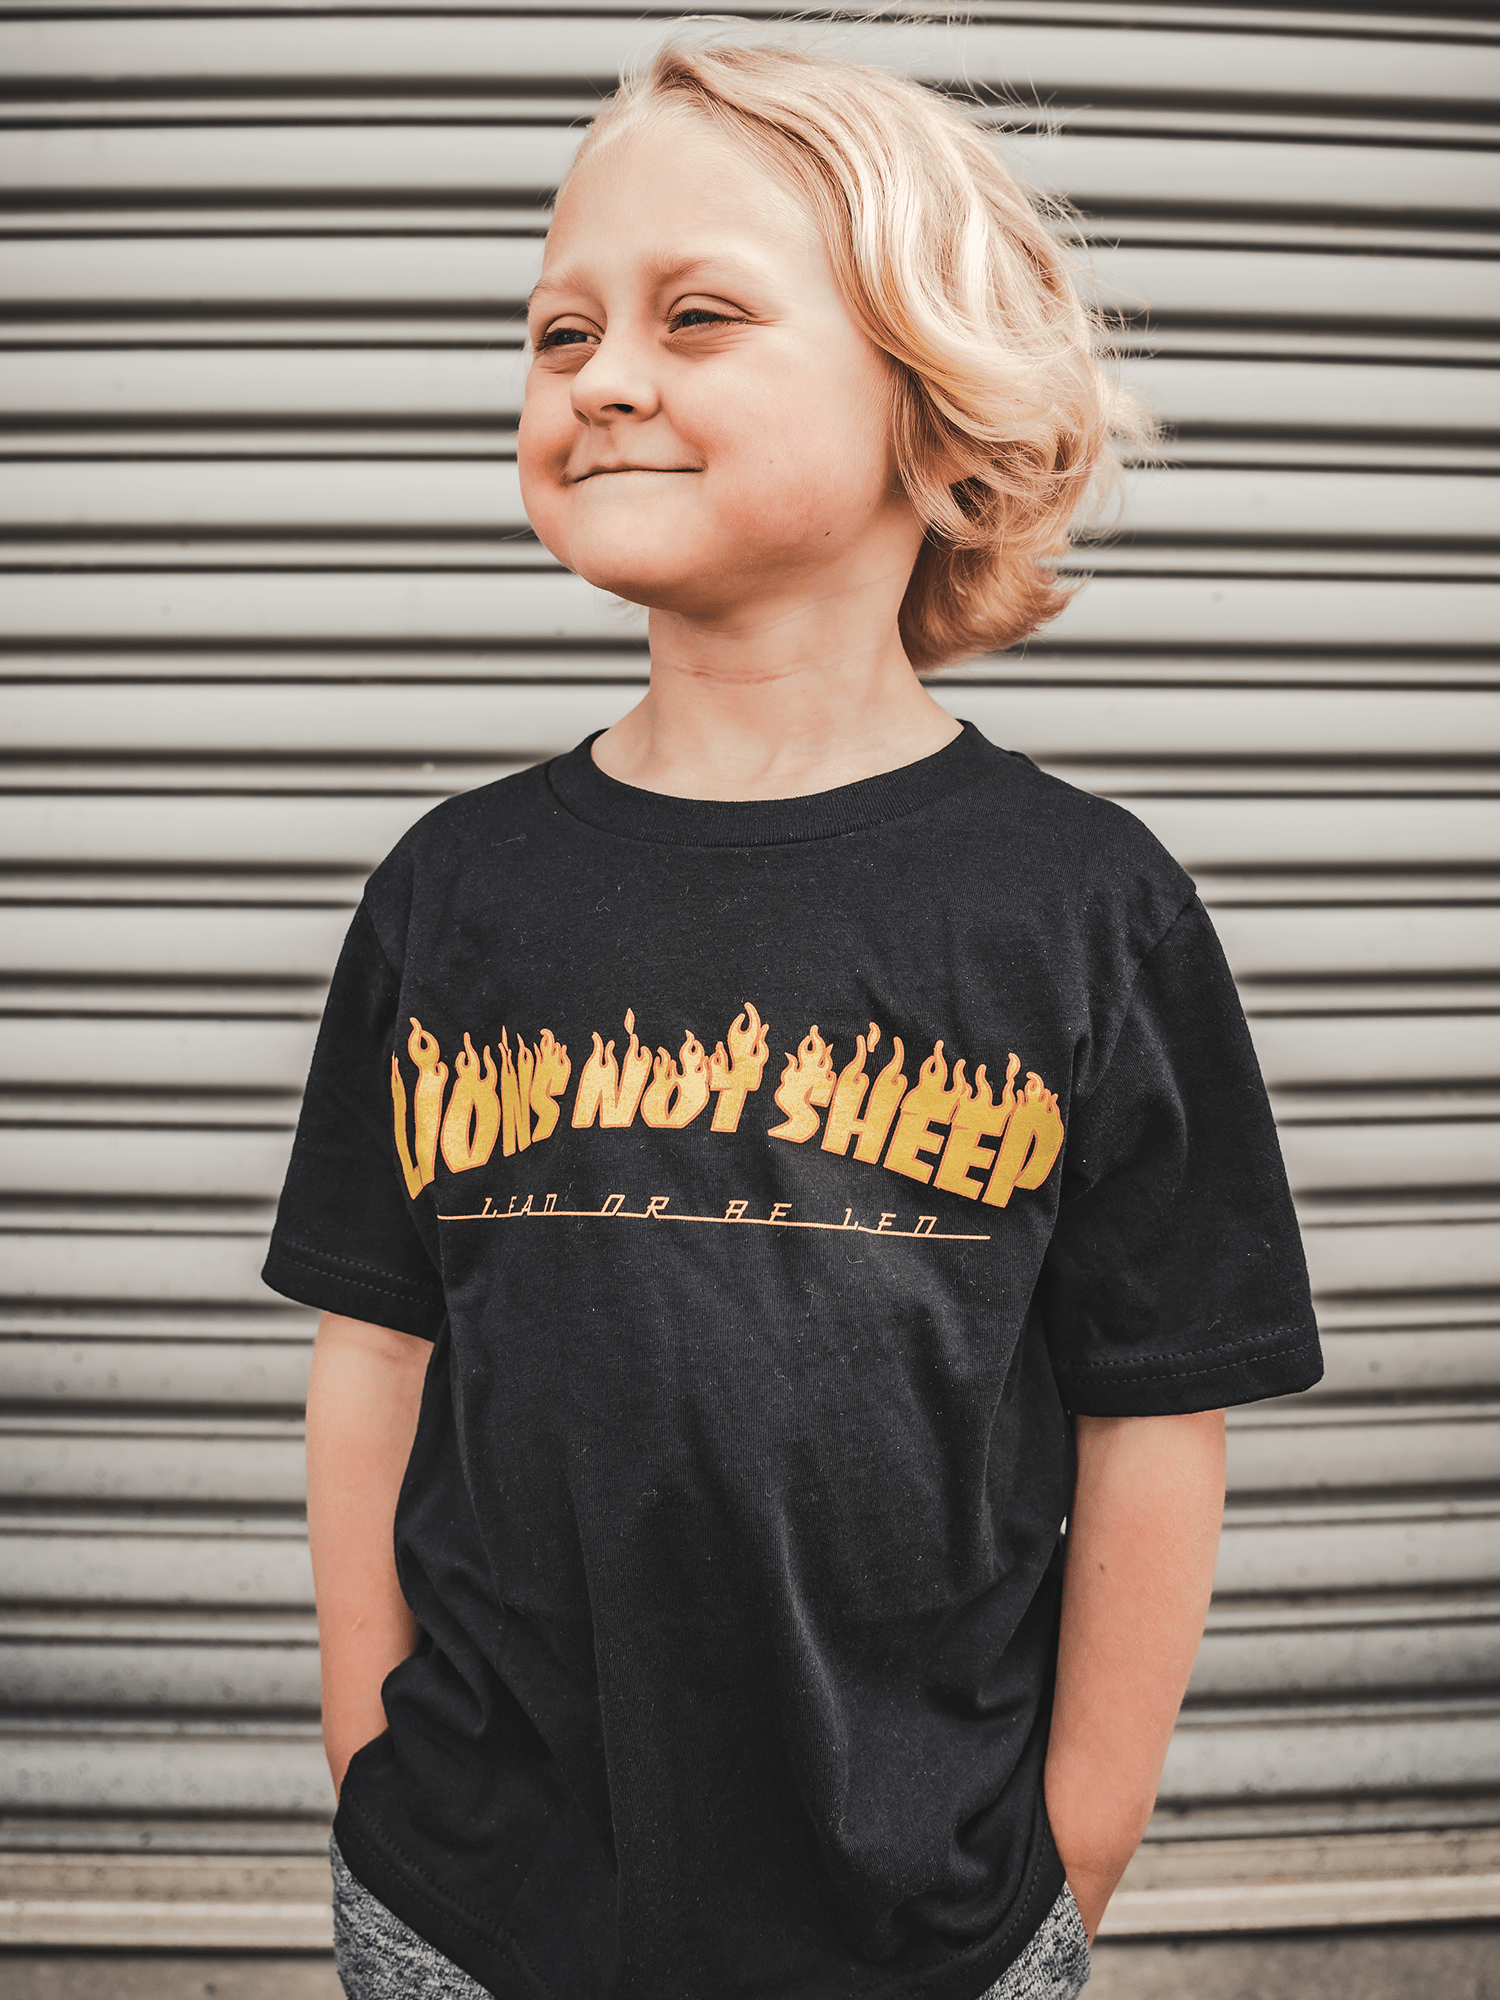 SHREDDER Youth Tee - Lions Not Sheep ®